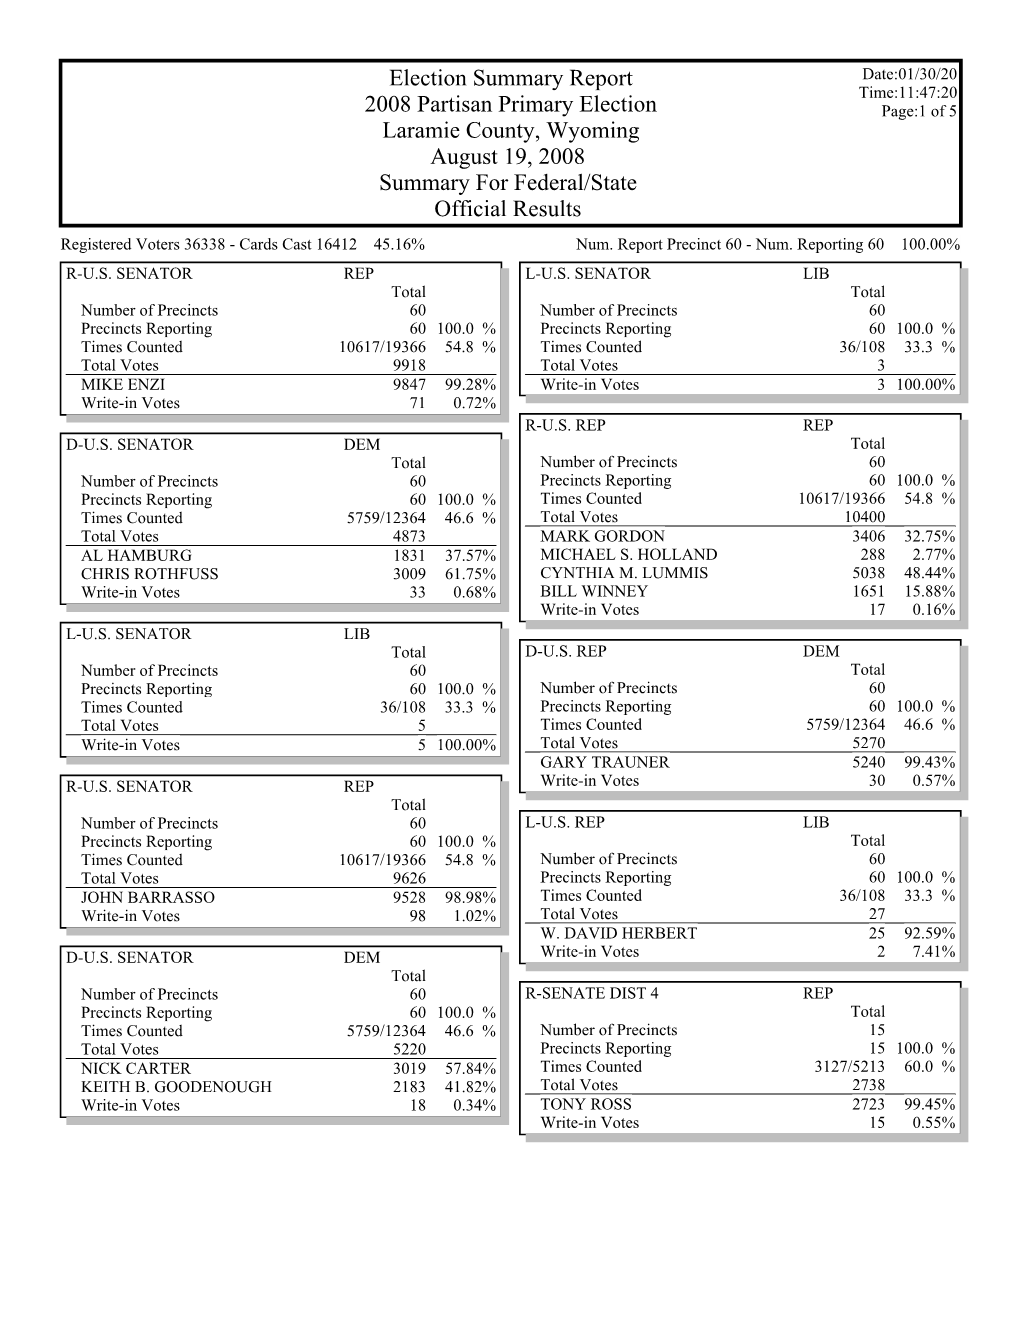 Primary Election Results – Federal and State Summary Report